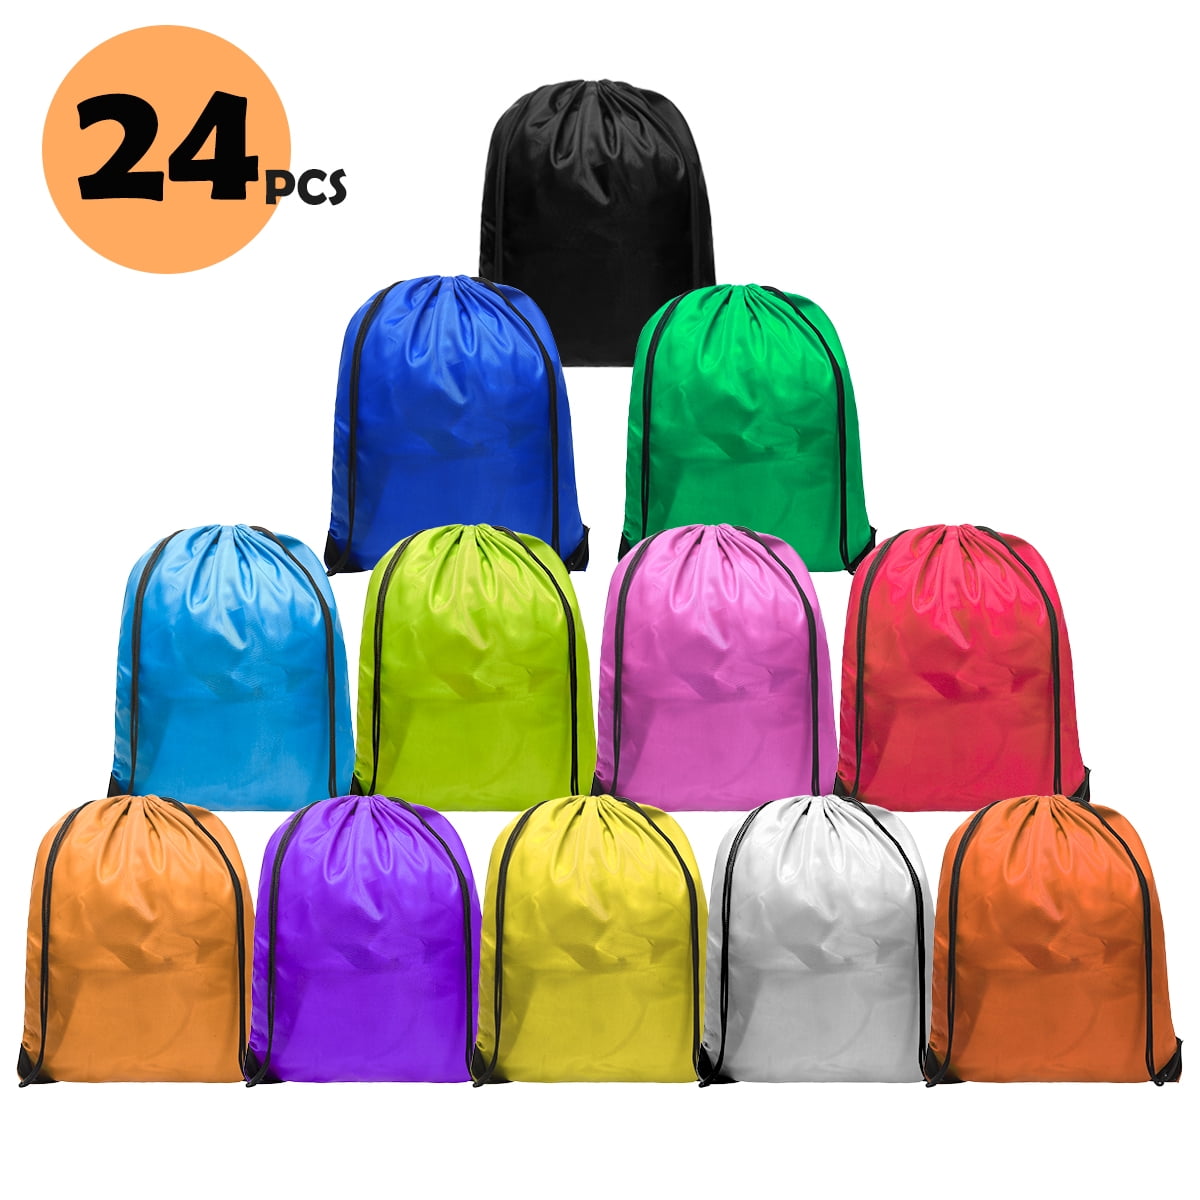 Fitness PZZ BEACH Colorful Horse Pattern Drawstring Bag Kids Birthday Gifts Sports String Backpack Gym Daypack for Travel